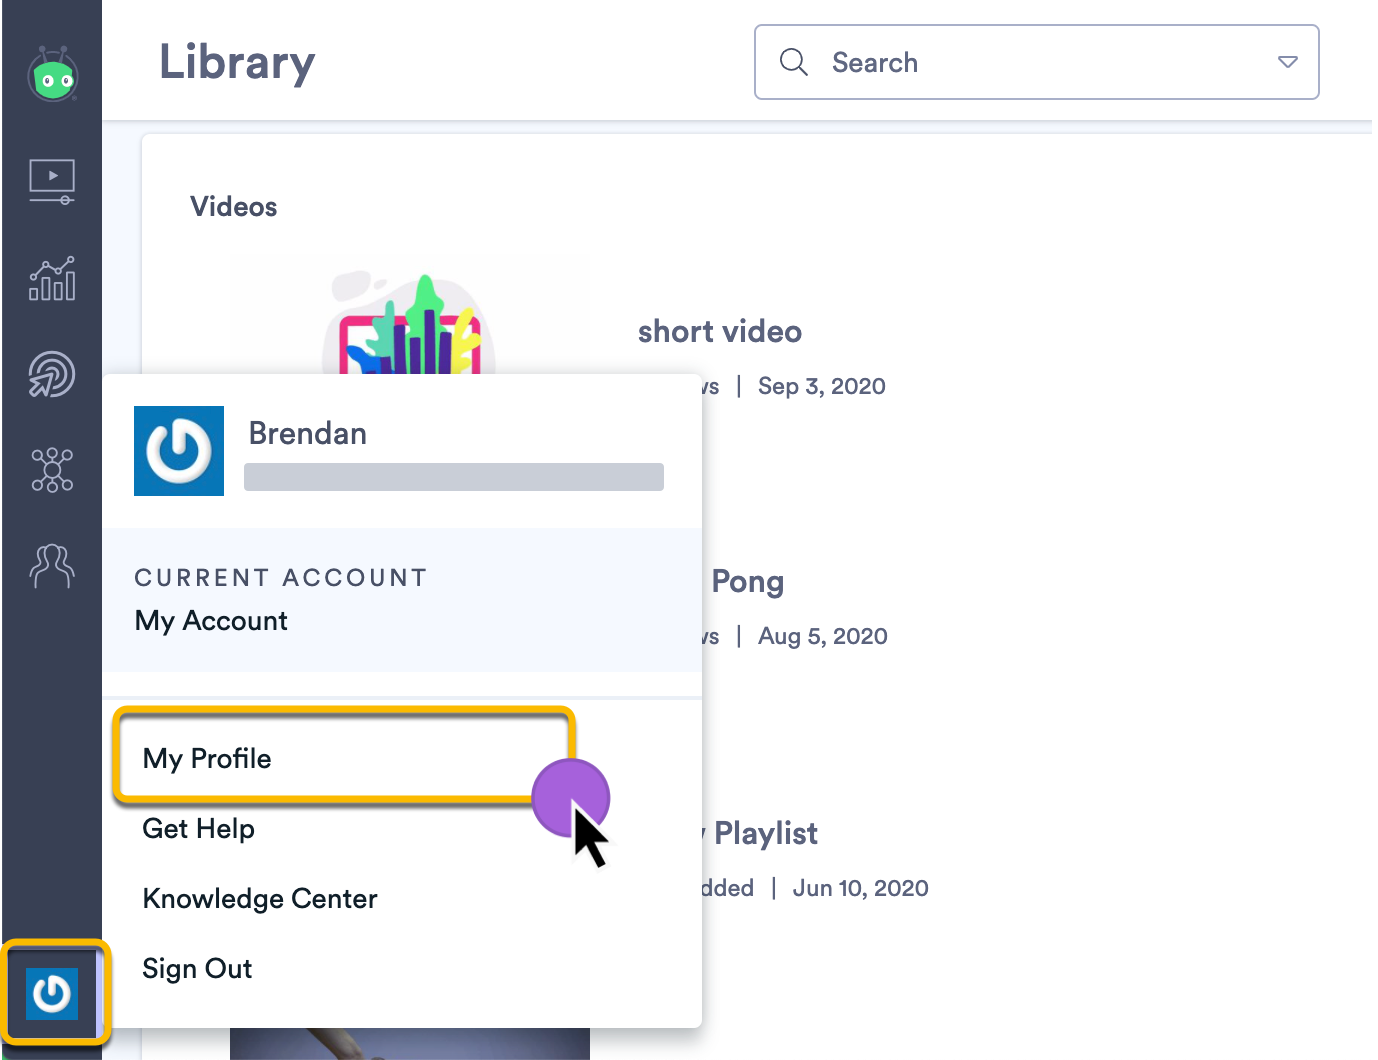 Opening your account profile from the main dashboard menu in Vidyard